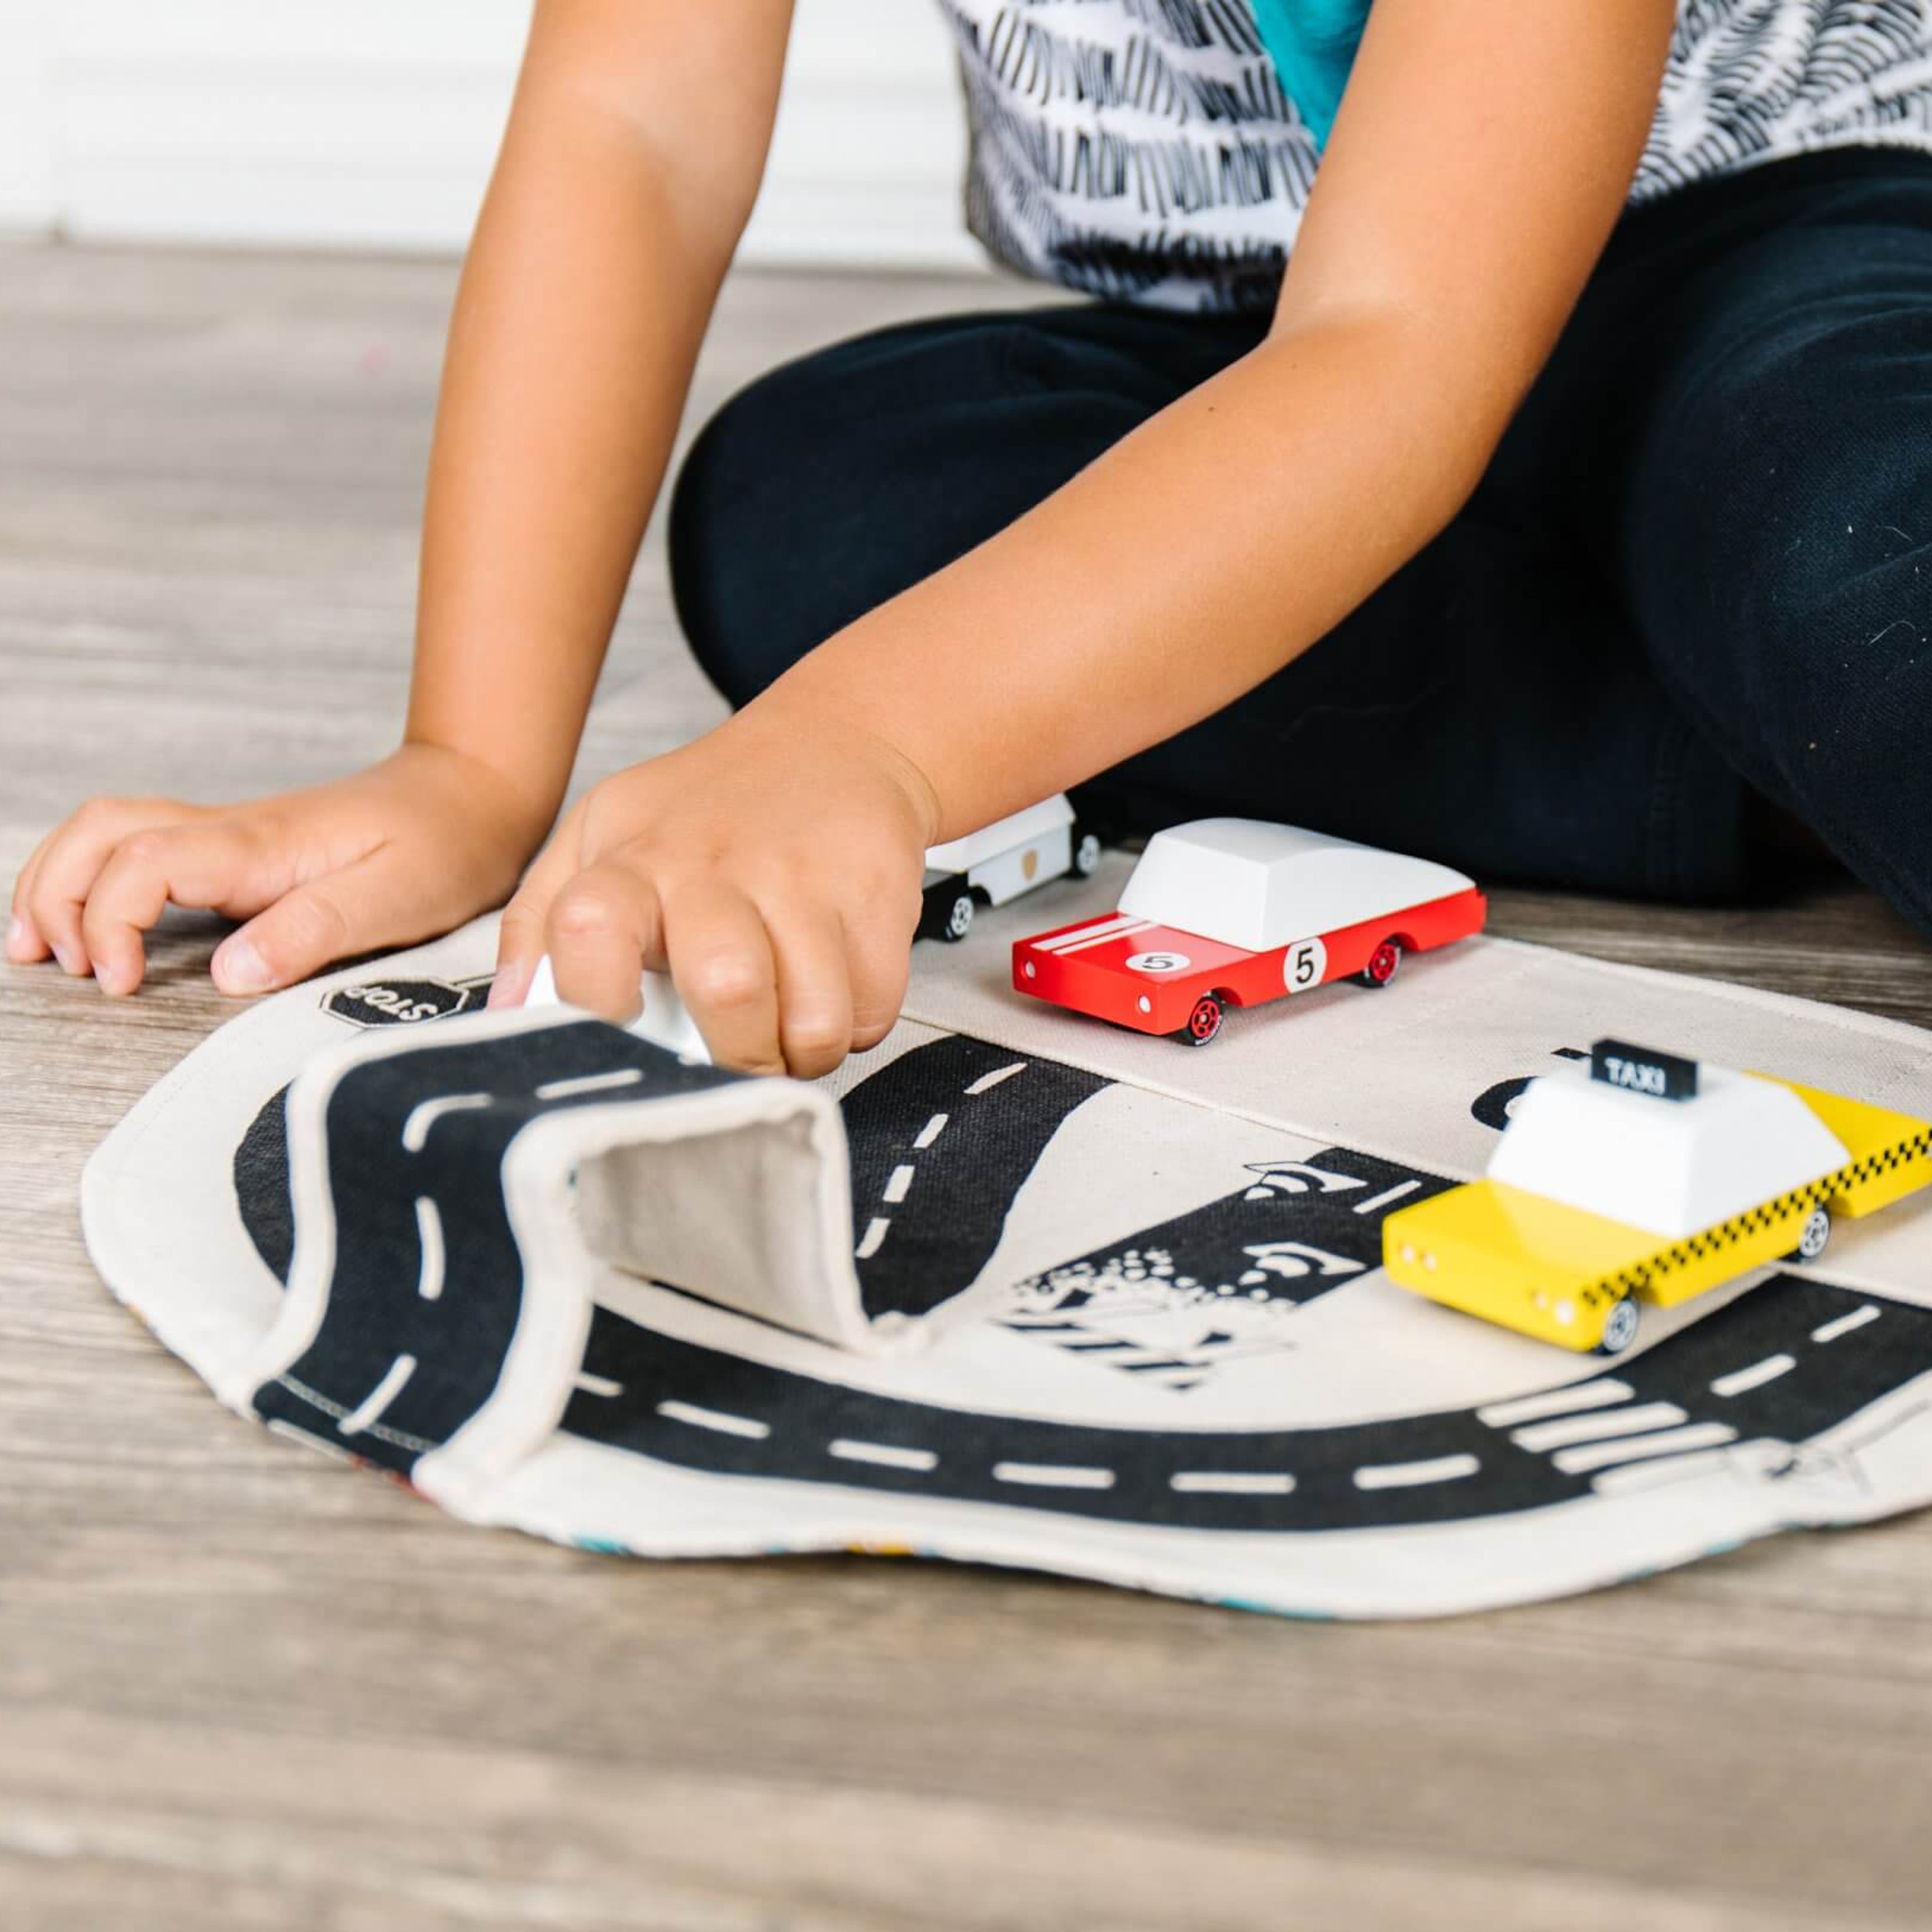 Car Play Mat: "The fun mat is so easy to travel with!"